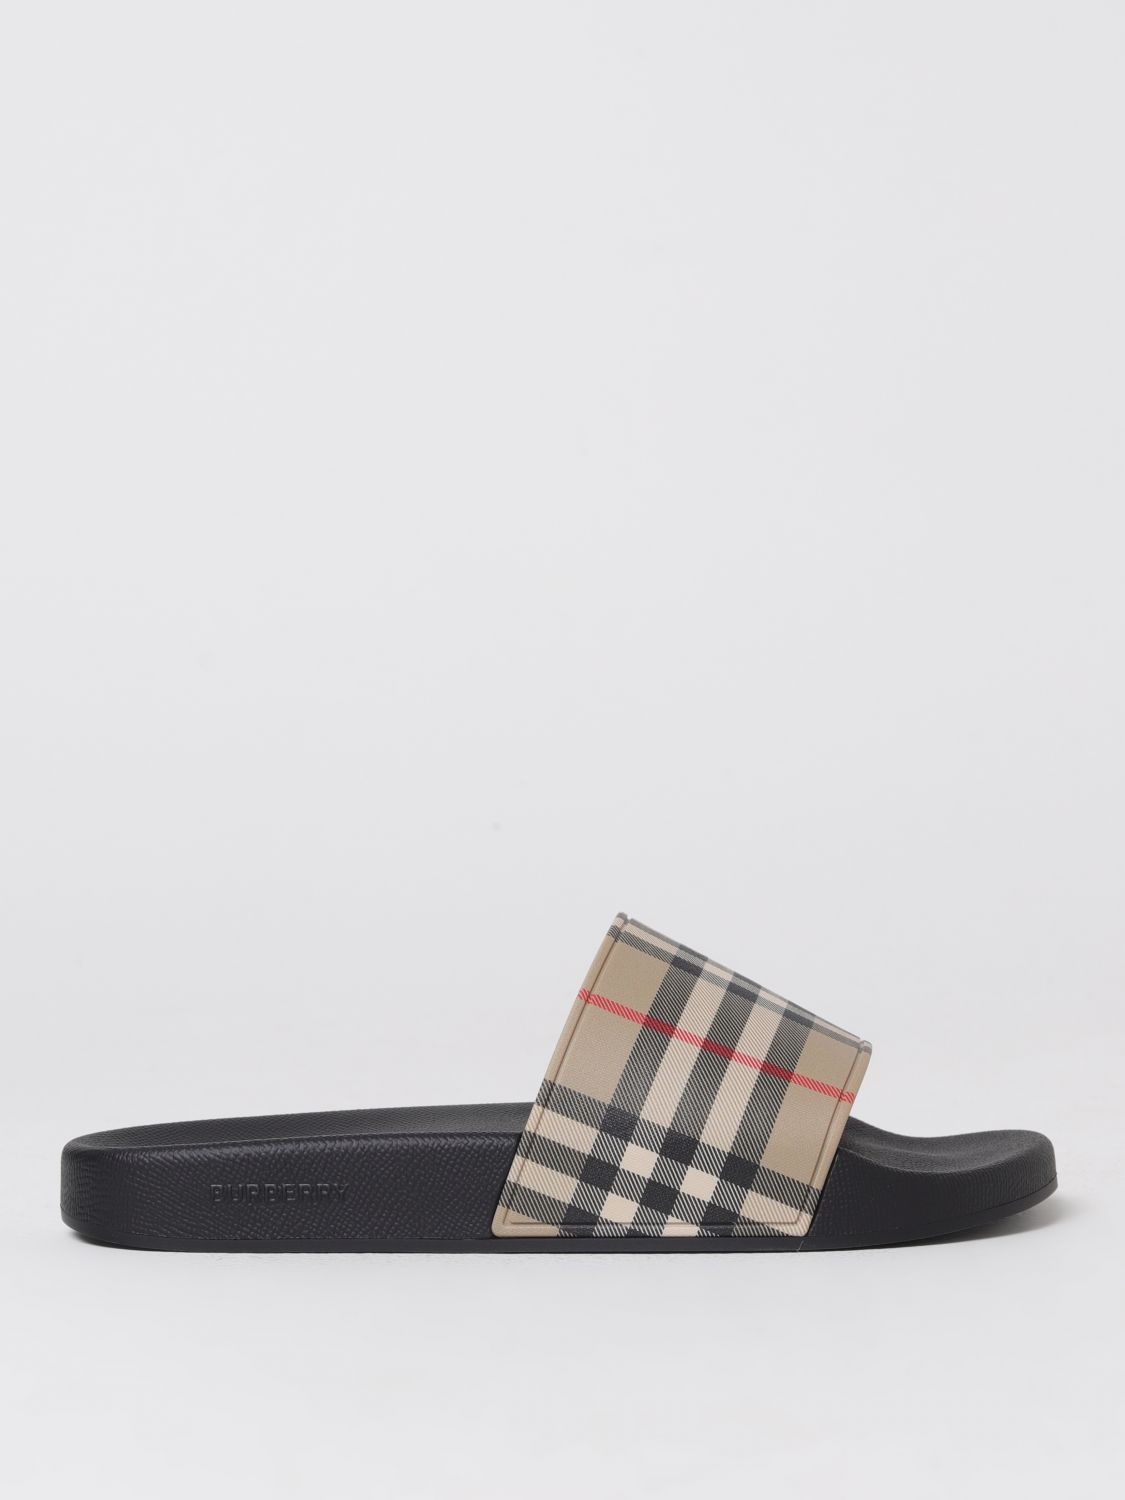 Burberry slides in rubber - 1